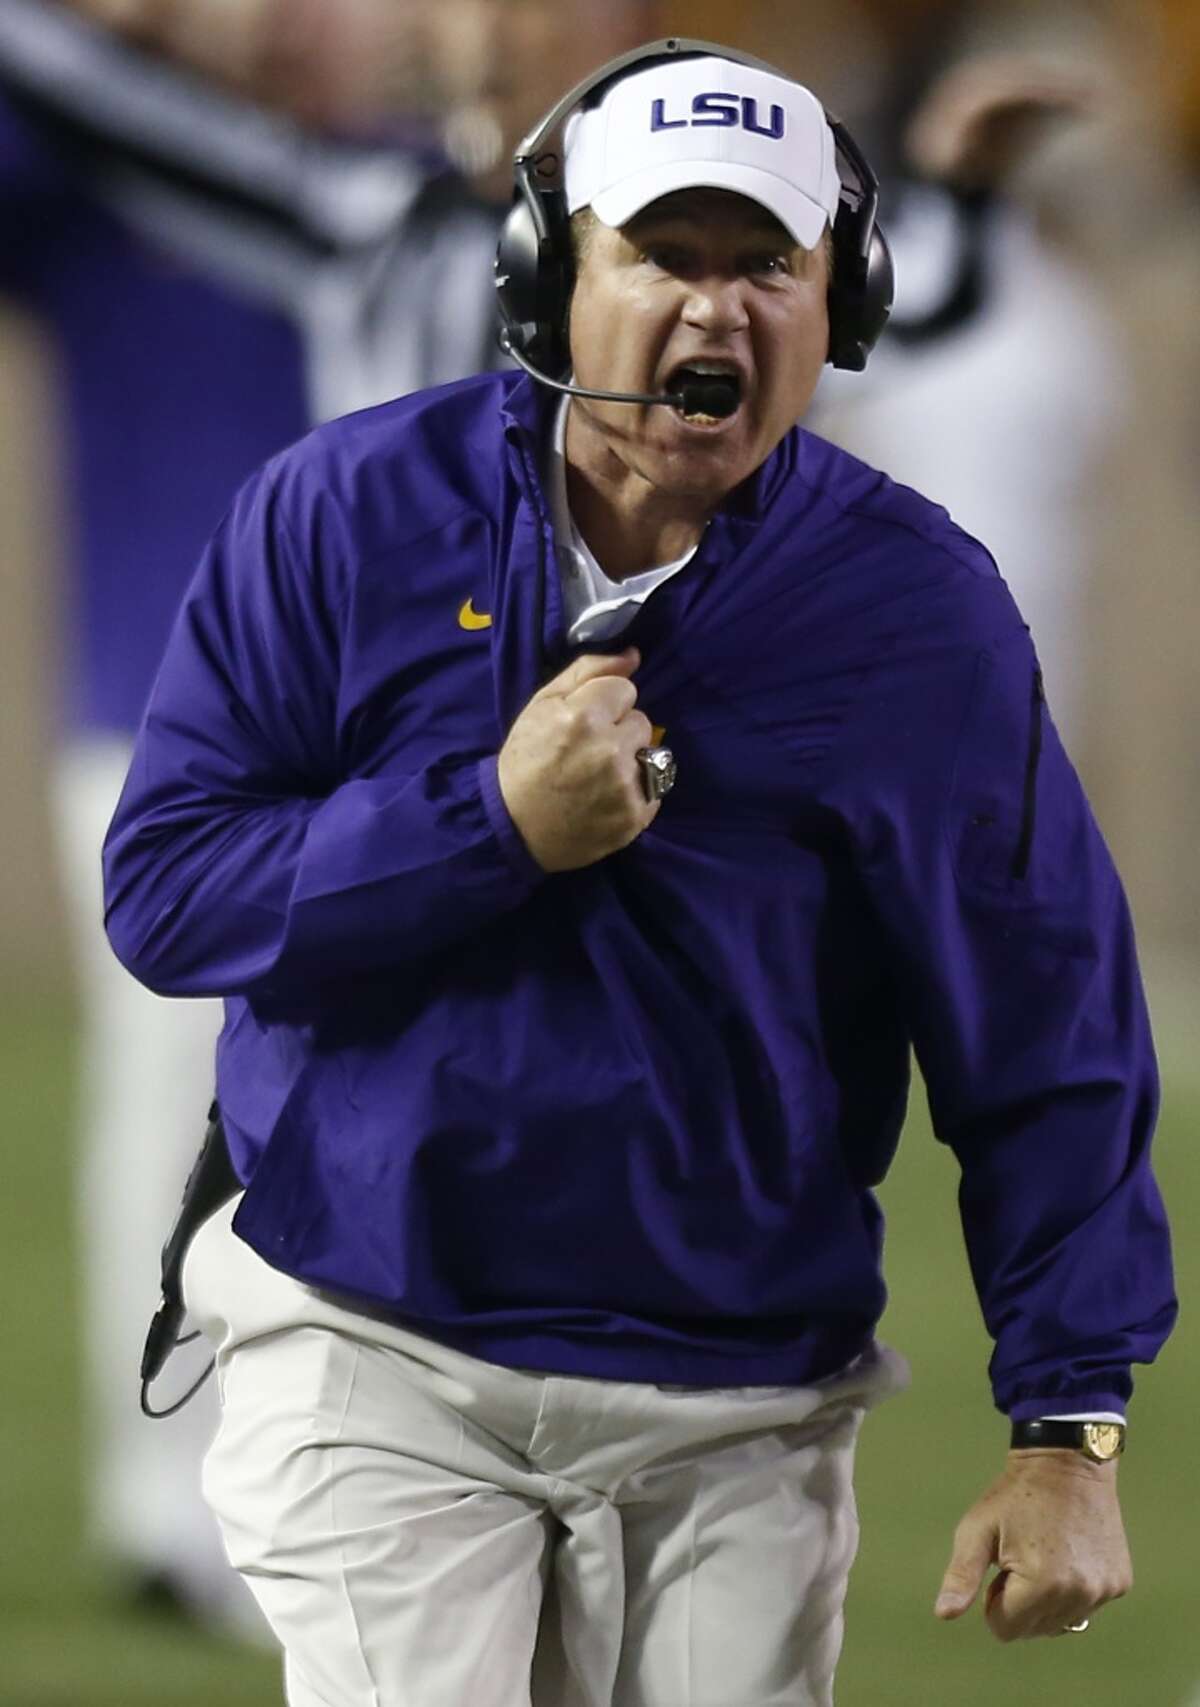 LSU head coach Les Miles argues a call during the first quarter of an NCAA college football game against Texas A&M at Kyle Field Thursday, Nov. 27, 2014, in College Station. ( Brett Coomer / Houston Chronicle )